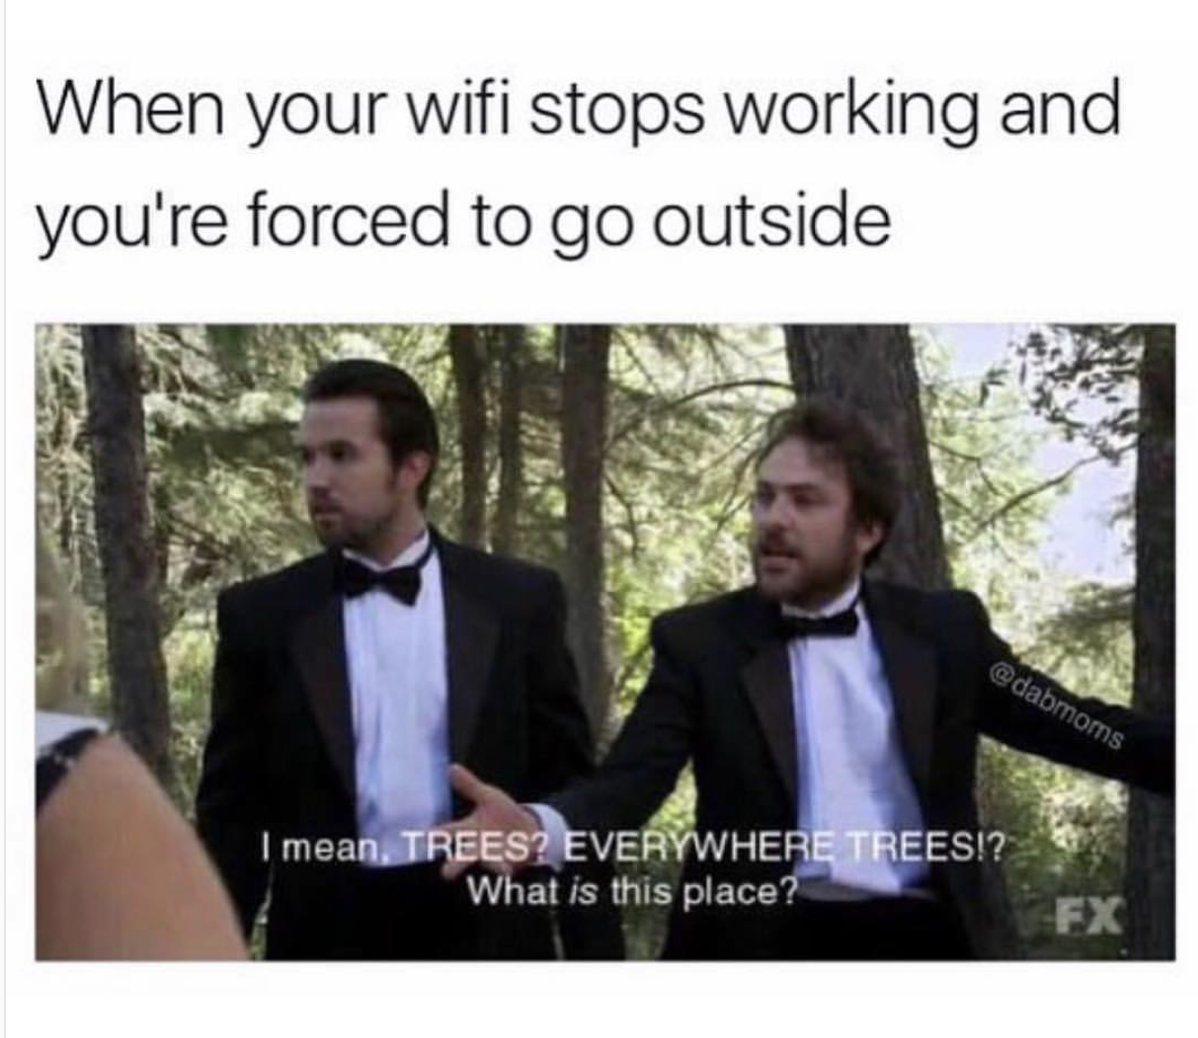 memes - always sunny in philadelphia quotes - When your wifi stops working and you're forced to go outside dabmoms I mean, Trees? Everywhere Trees!? What is this place? Fx